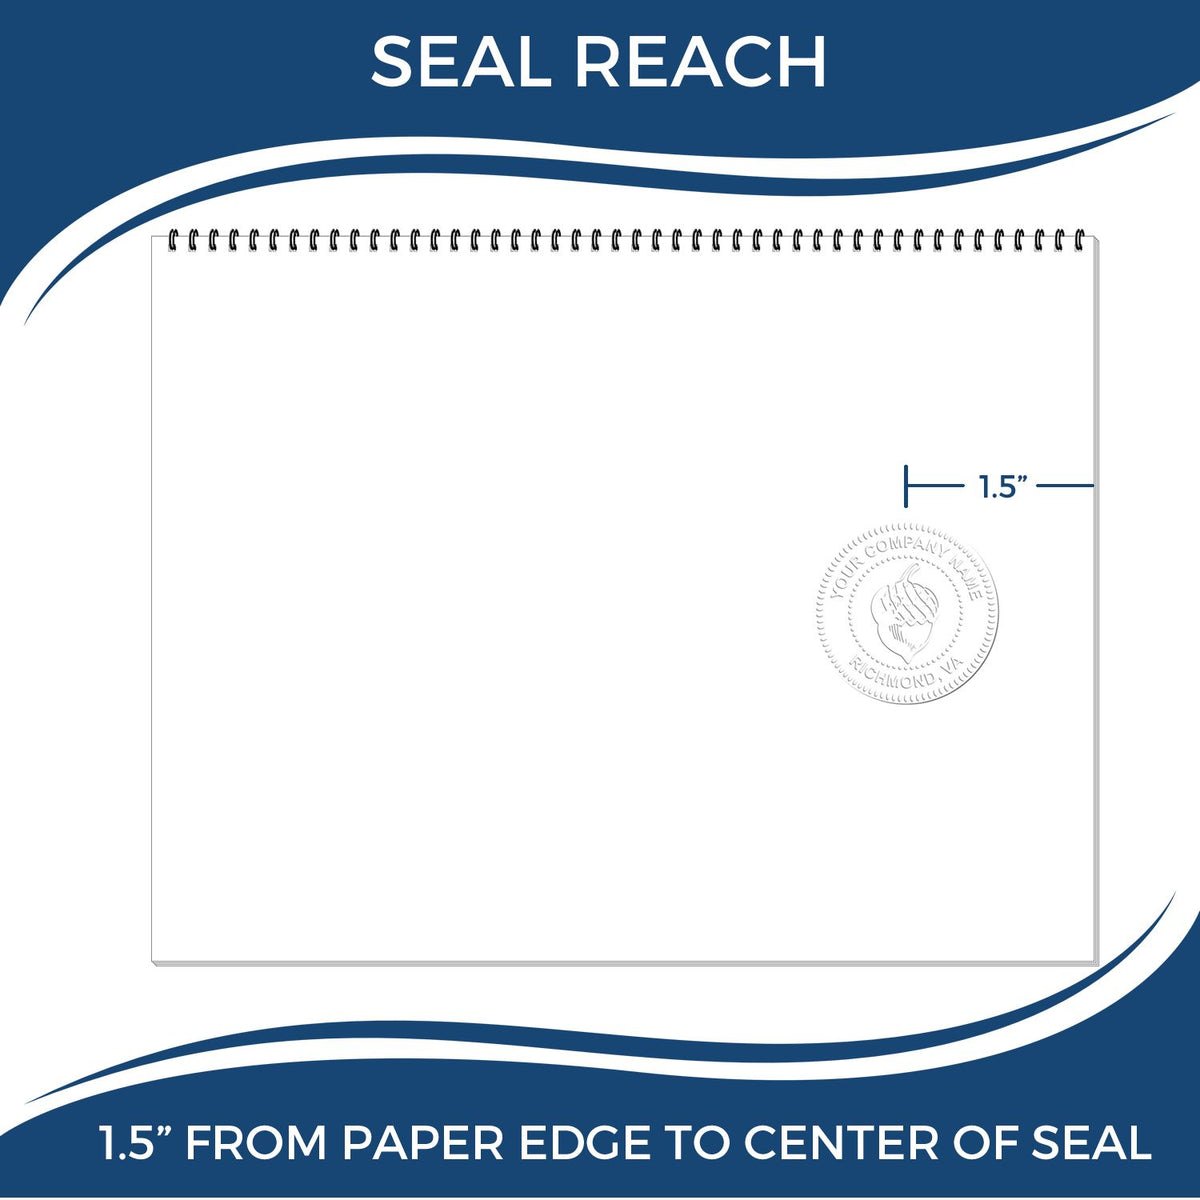 An infographic showing the seal reach which is represented by a ruler and a miniature seal image of the Hybrid Florida Engineer Seal